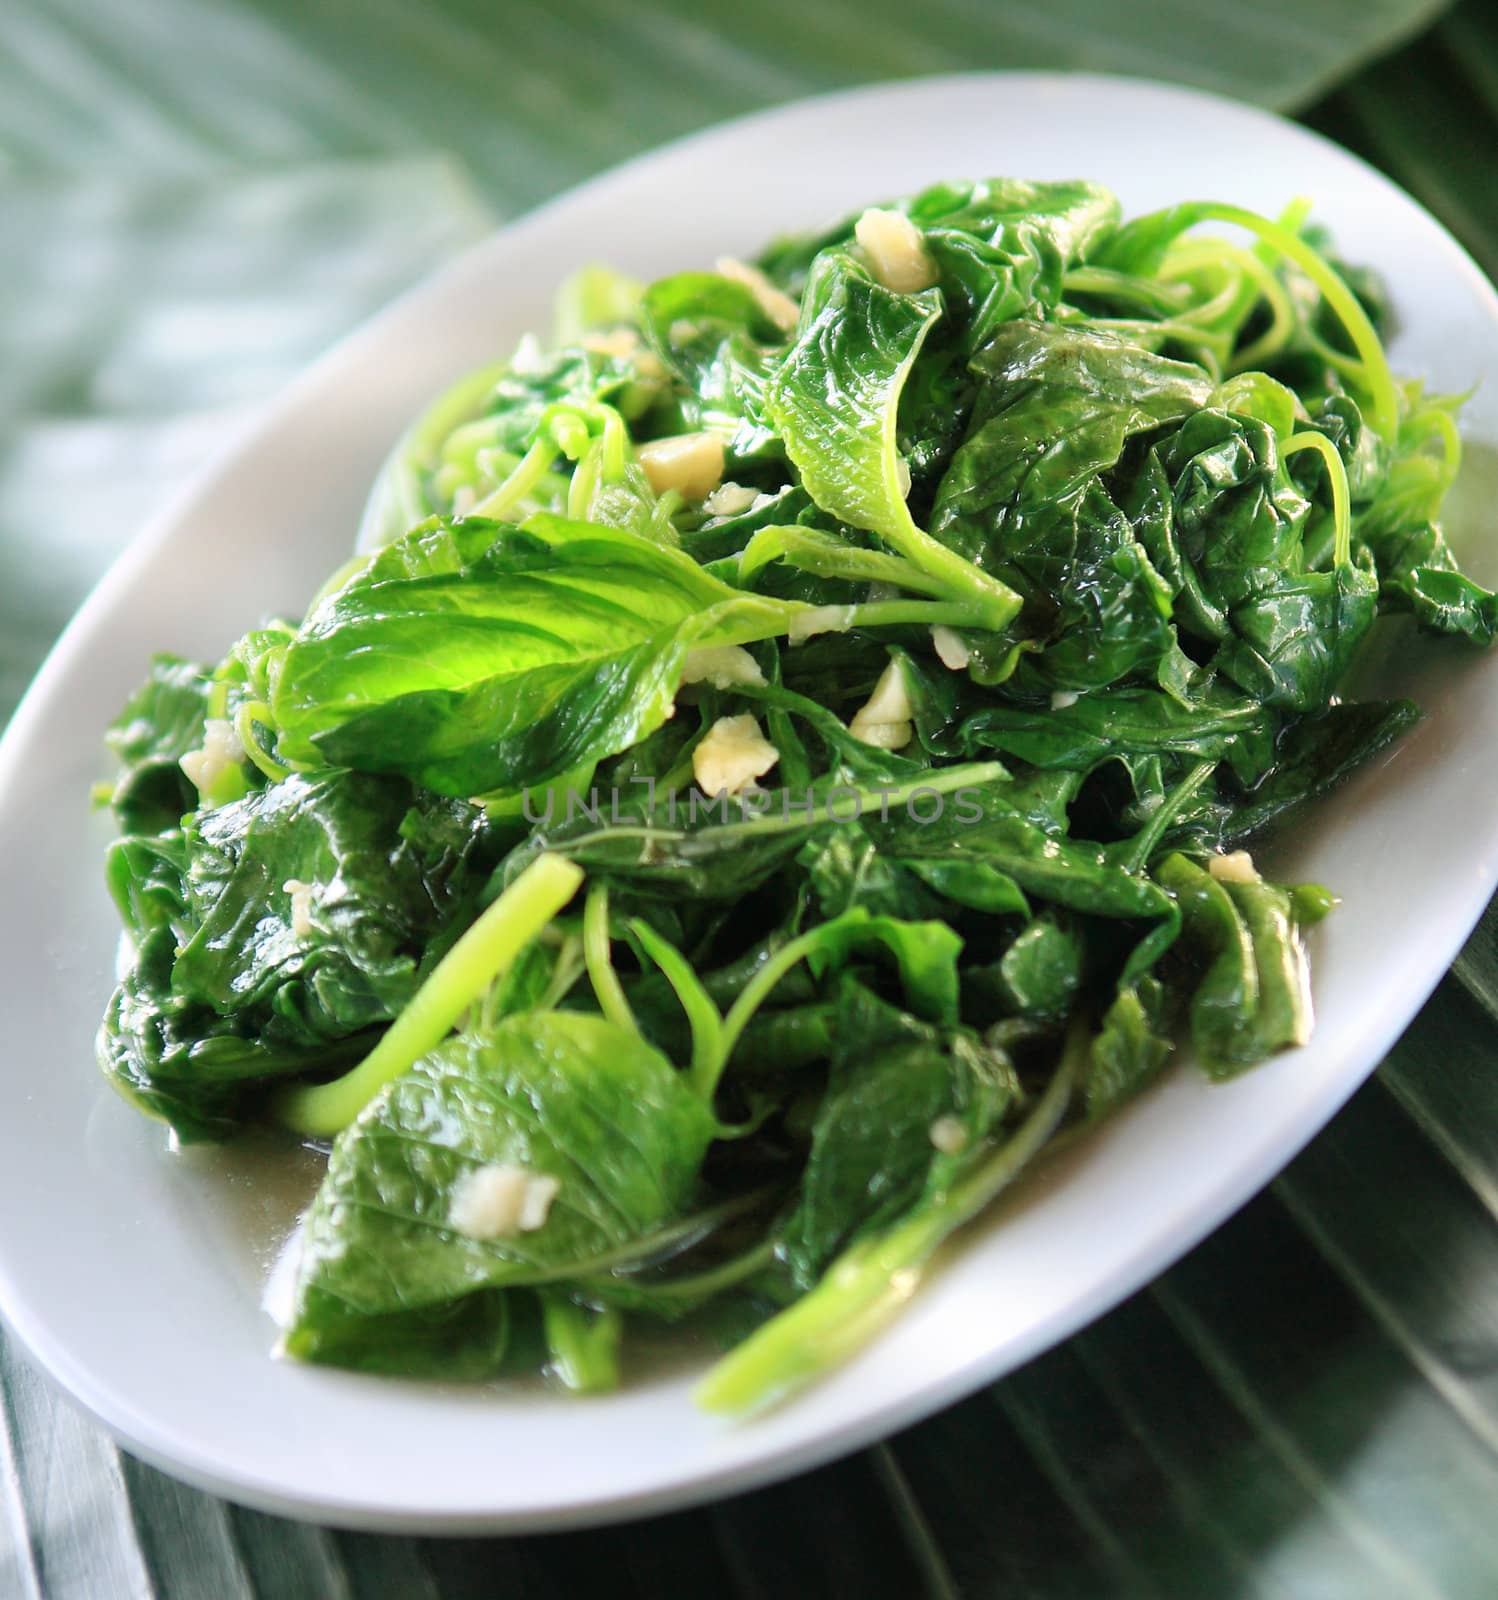 Stir fried water spinach with garlic by photosoup